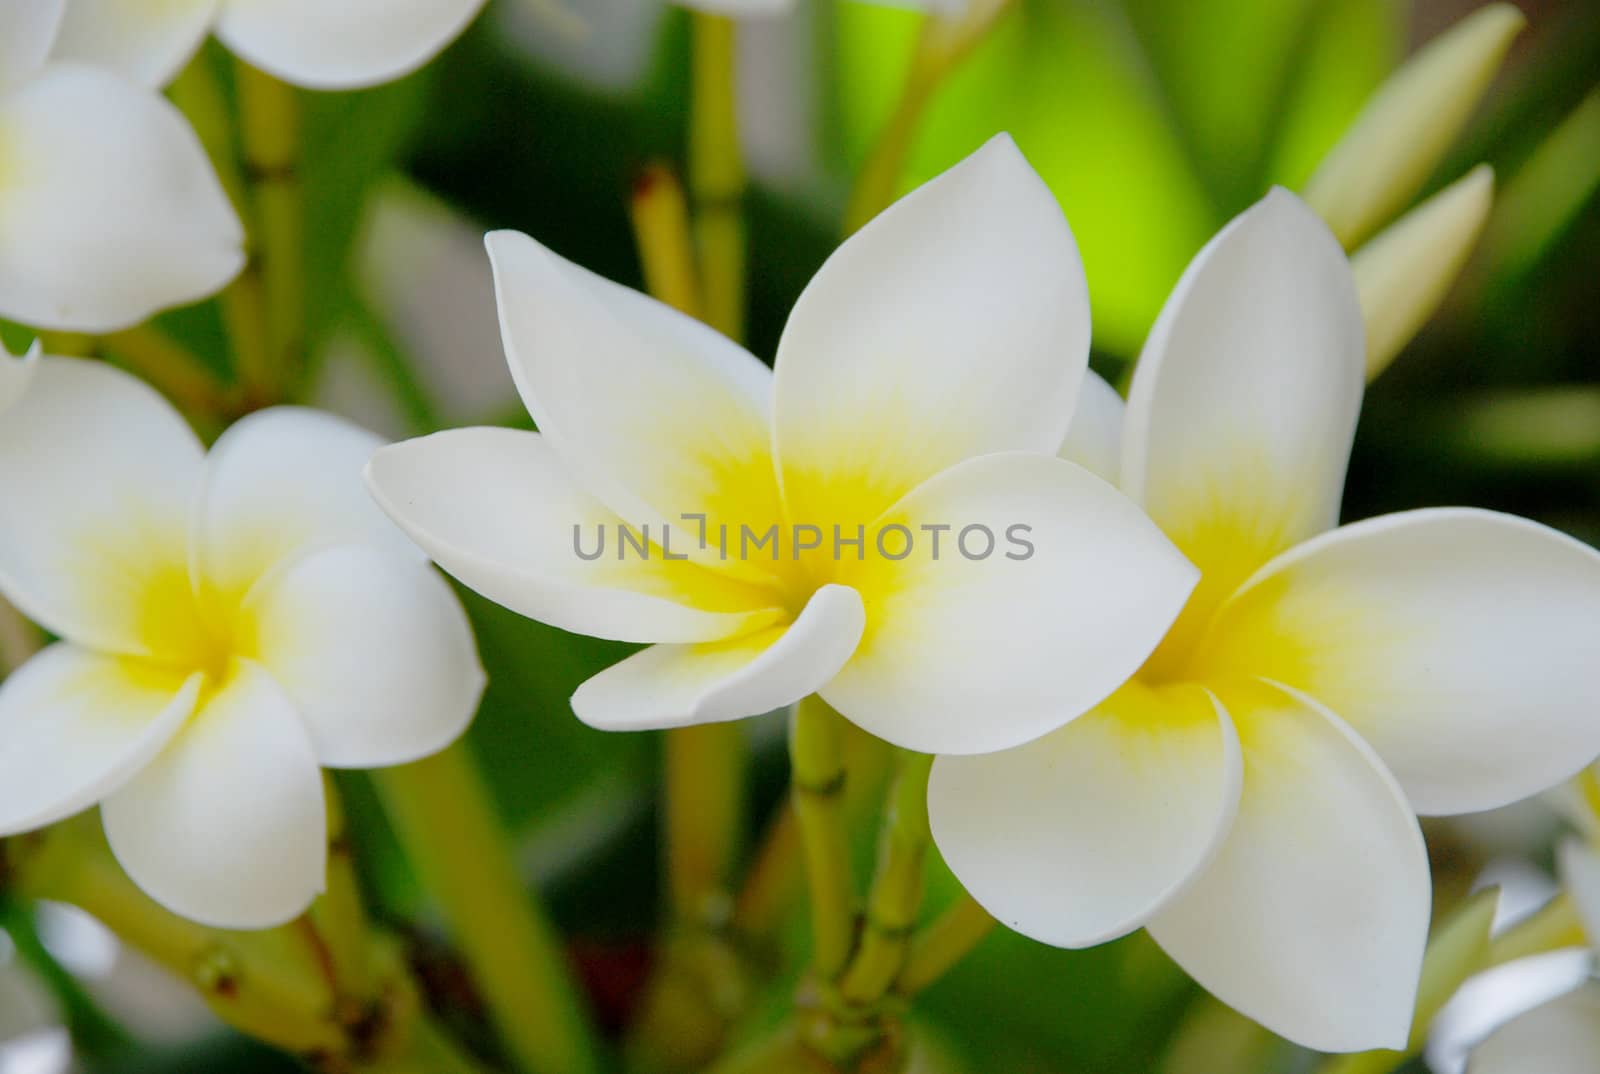 three white and yellow narcissuses whith a green background which are stems of flowers.